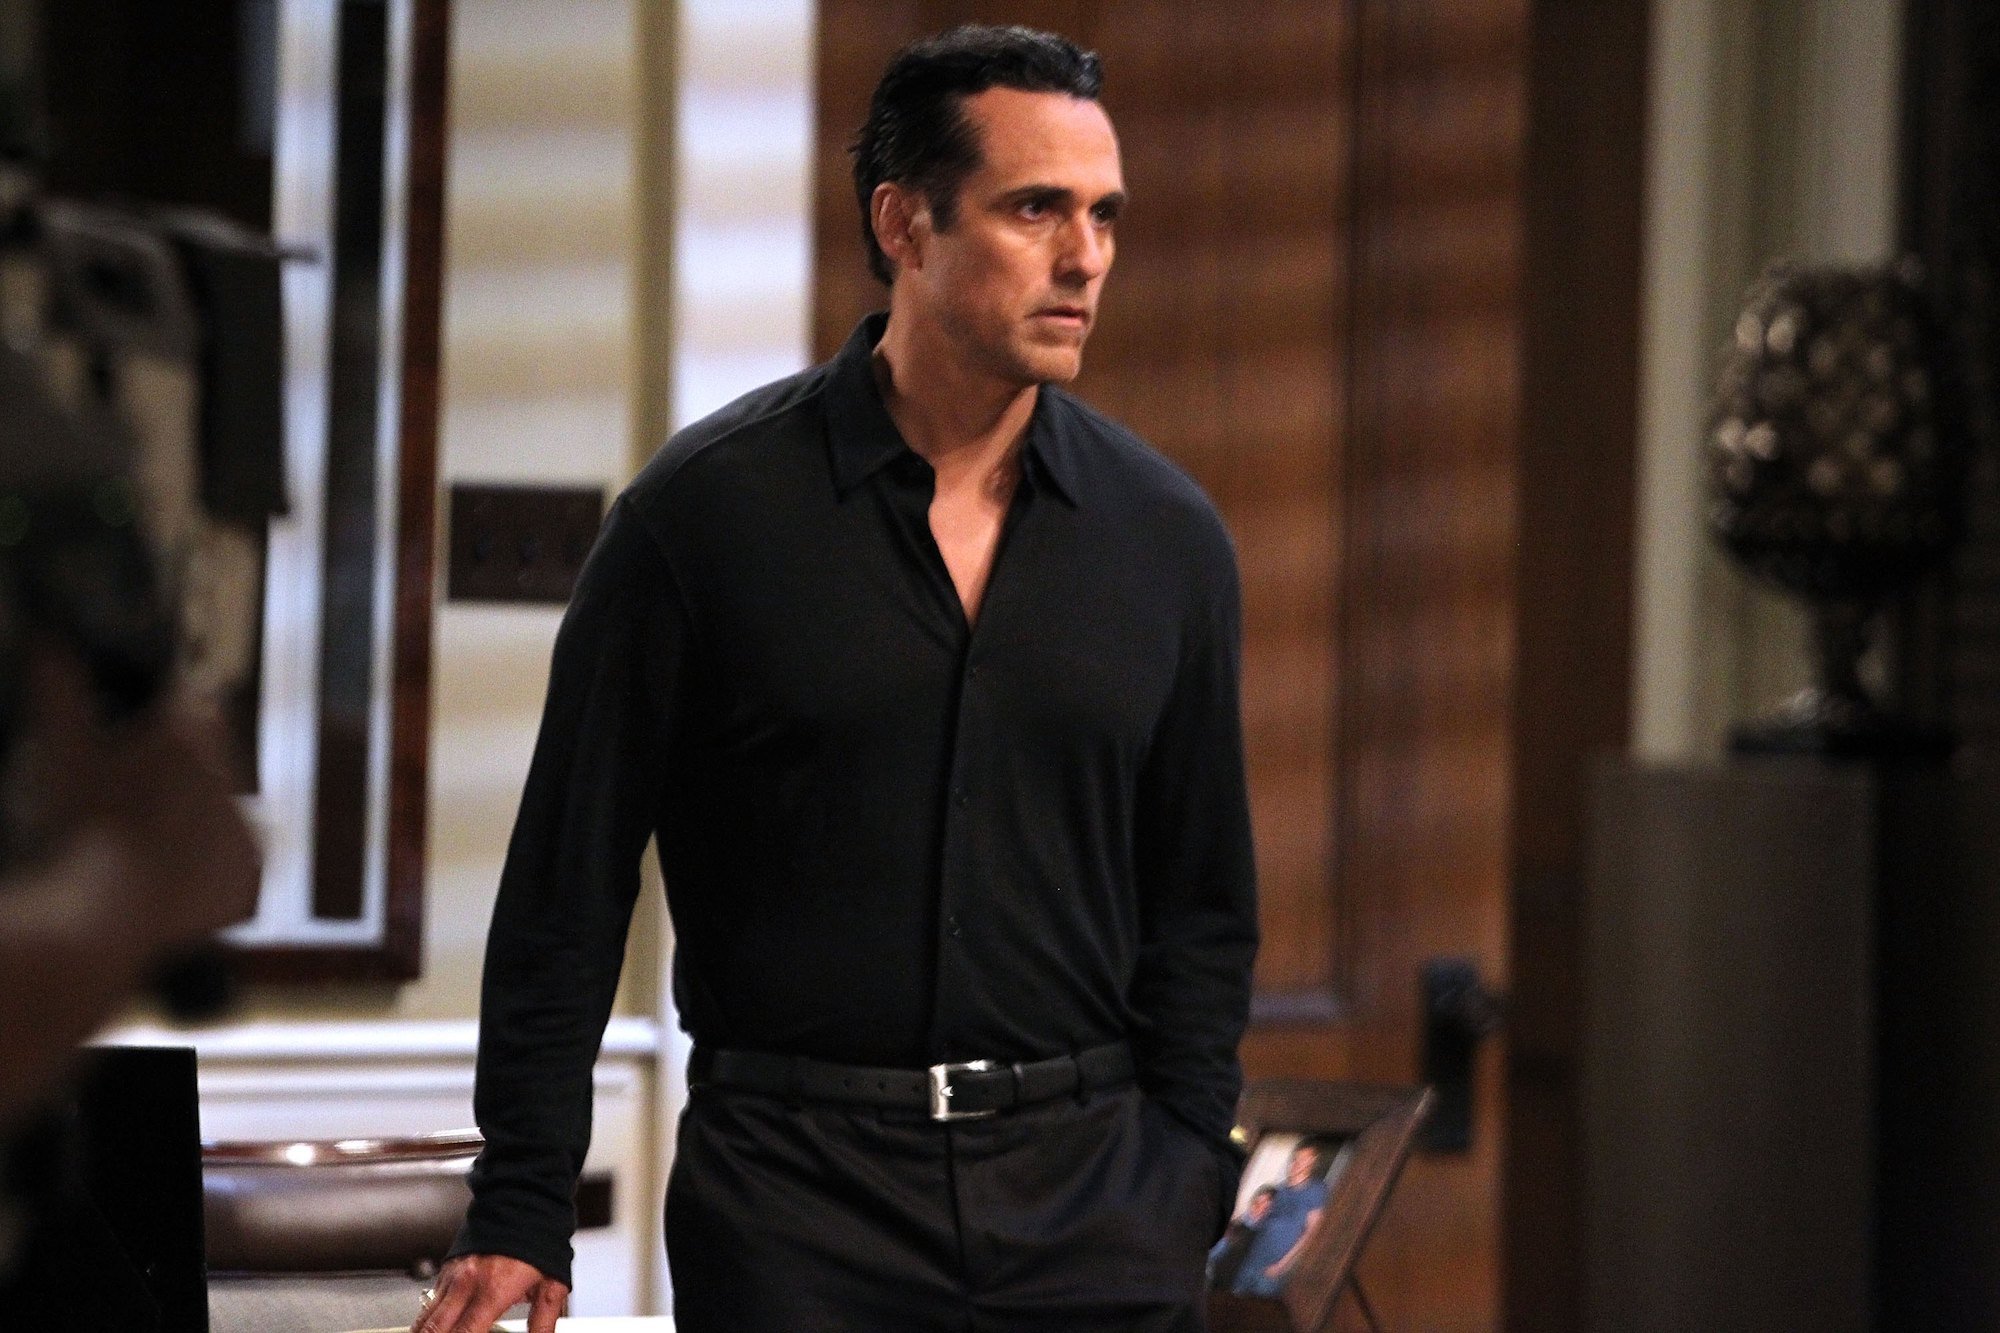 Who Is ‘General Hospital’ Actor Maurice Benard’s Wife?